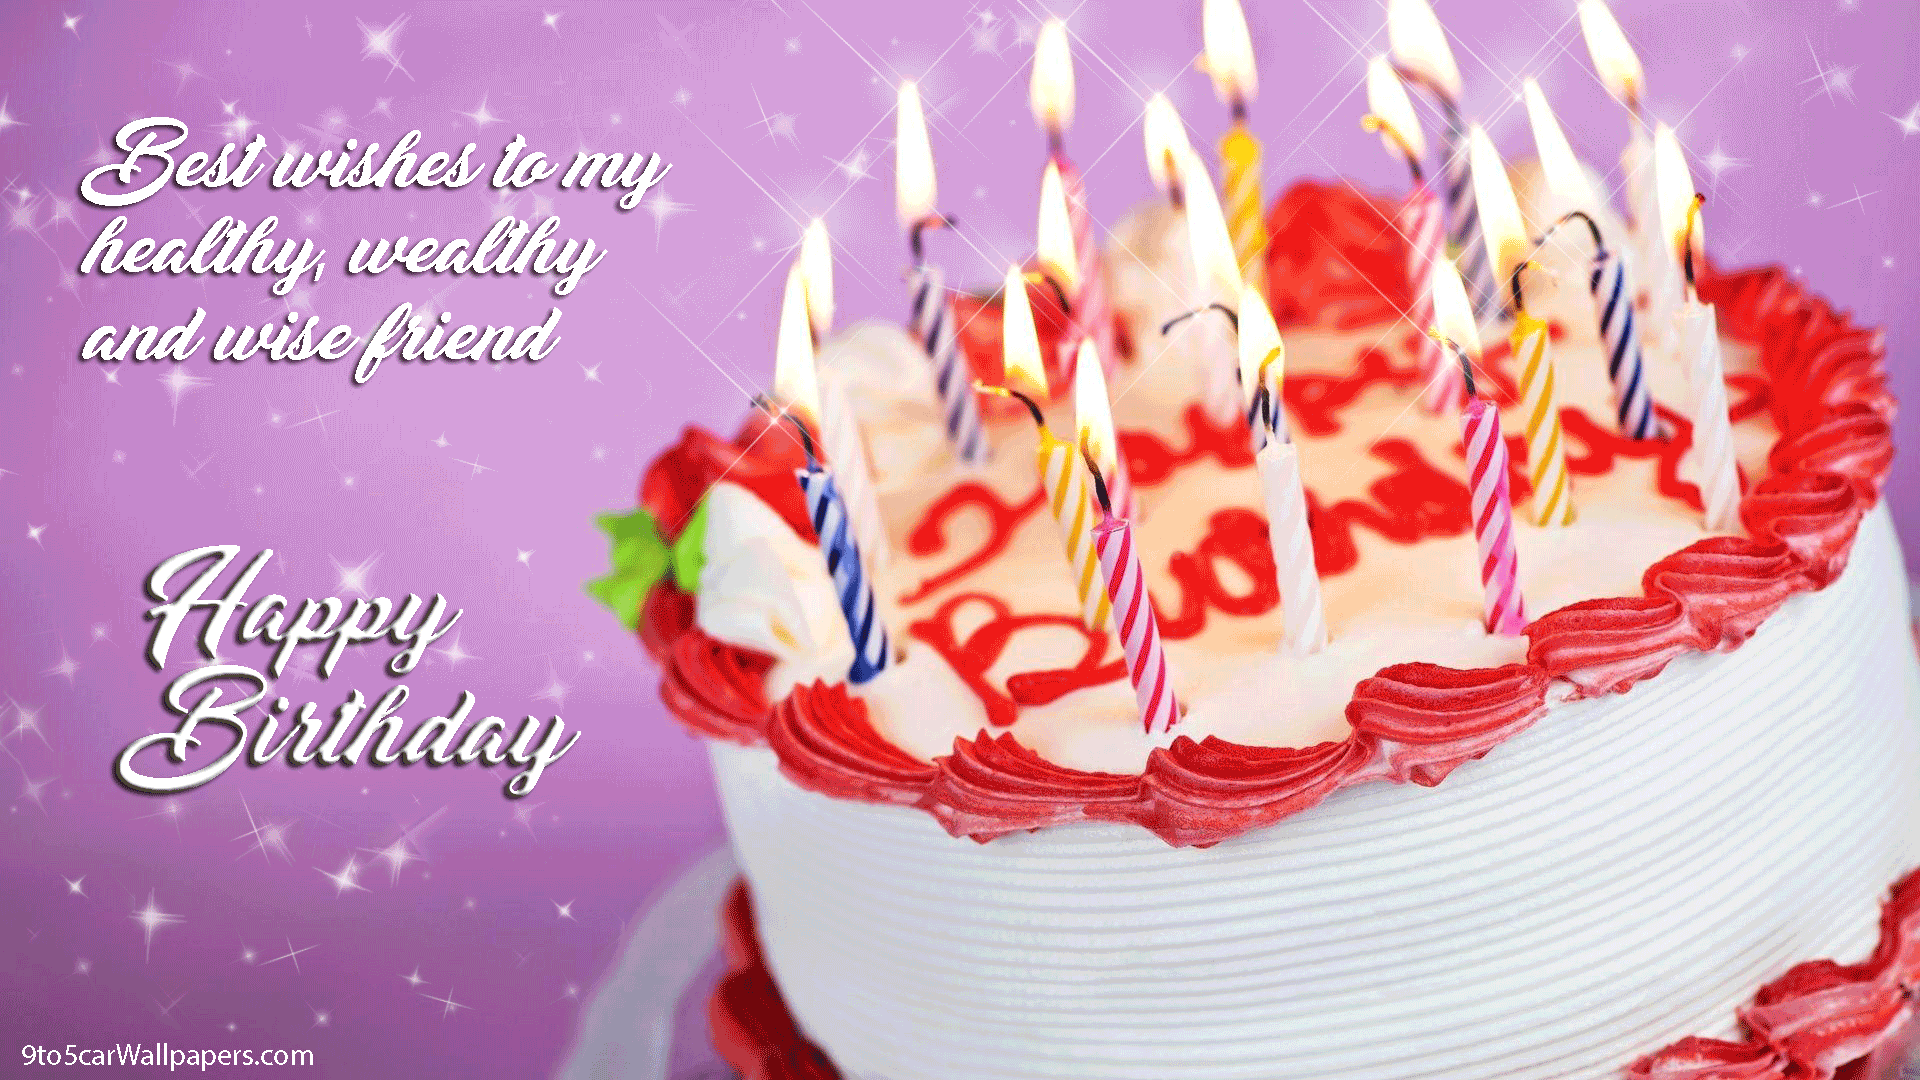 Happy Birthday Animated Images Free Download - 9to5 Car Wallpapers